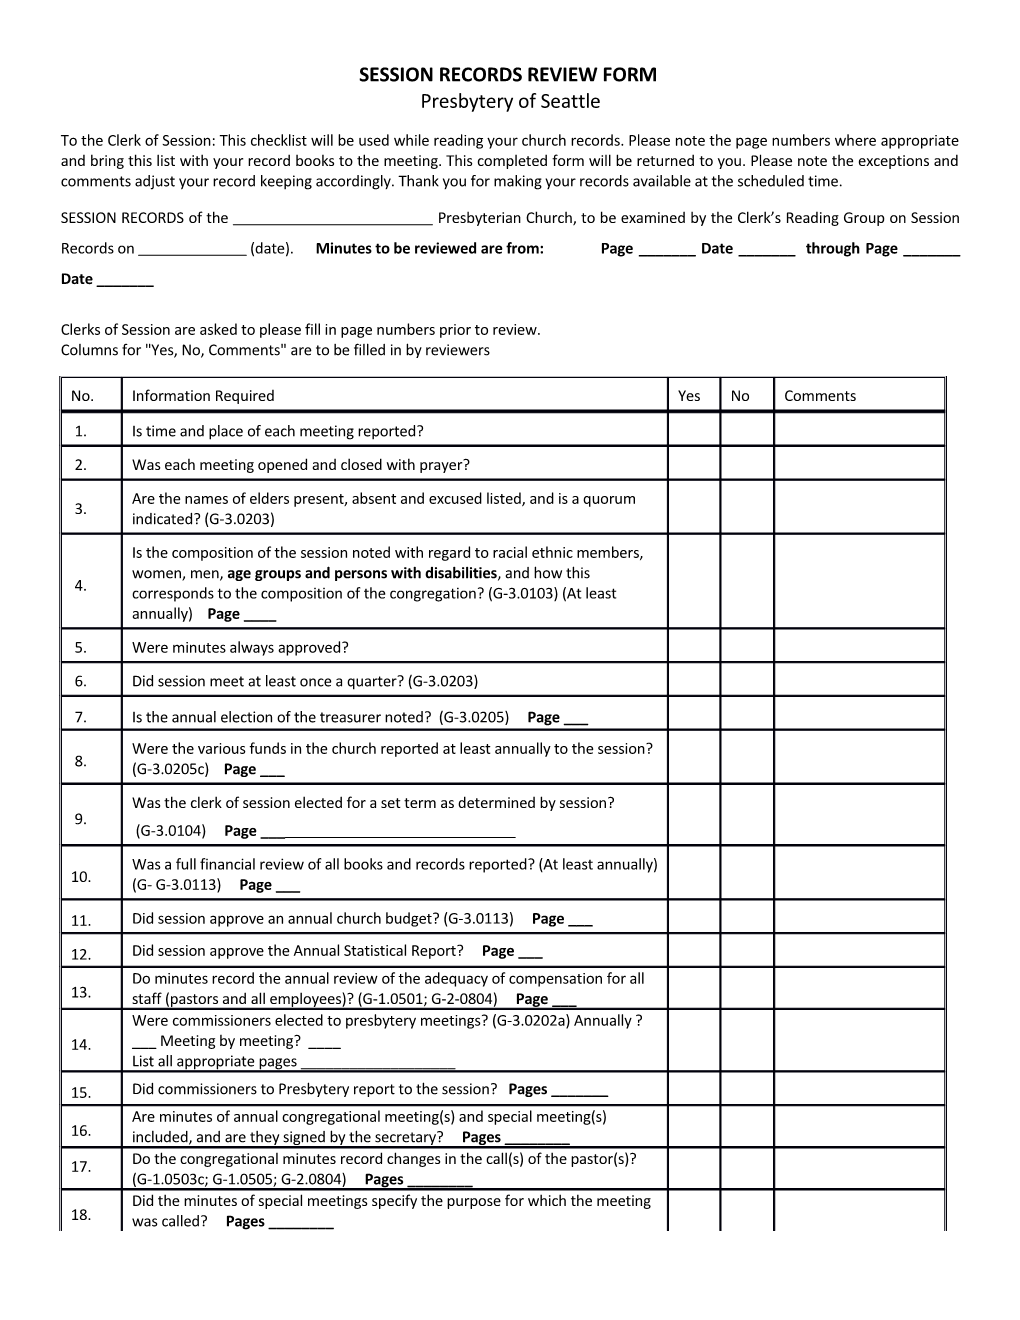 Session Records Review Form